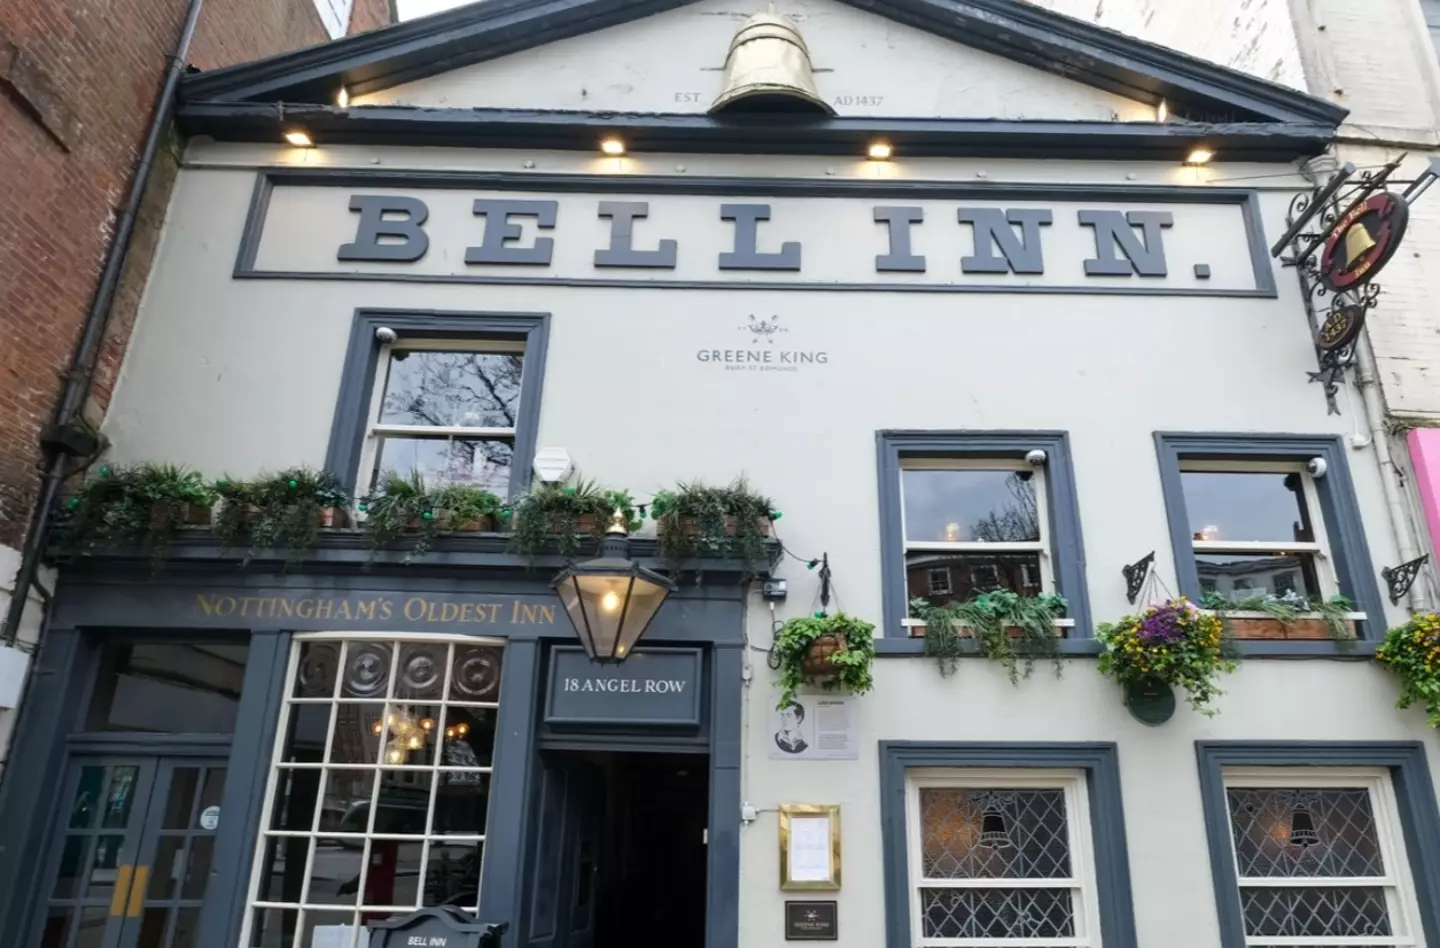 The '£2 for three beers' offer is also good at the Bell Inn, which claims to be Nottingham's oldest Inn, which would seem to contradict another pub.